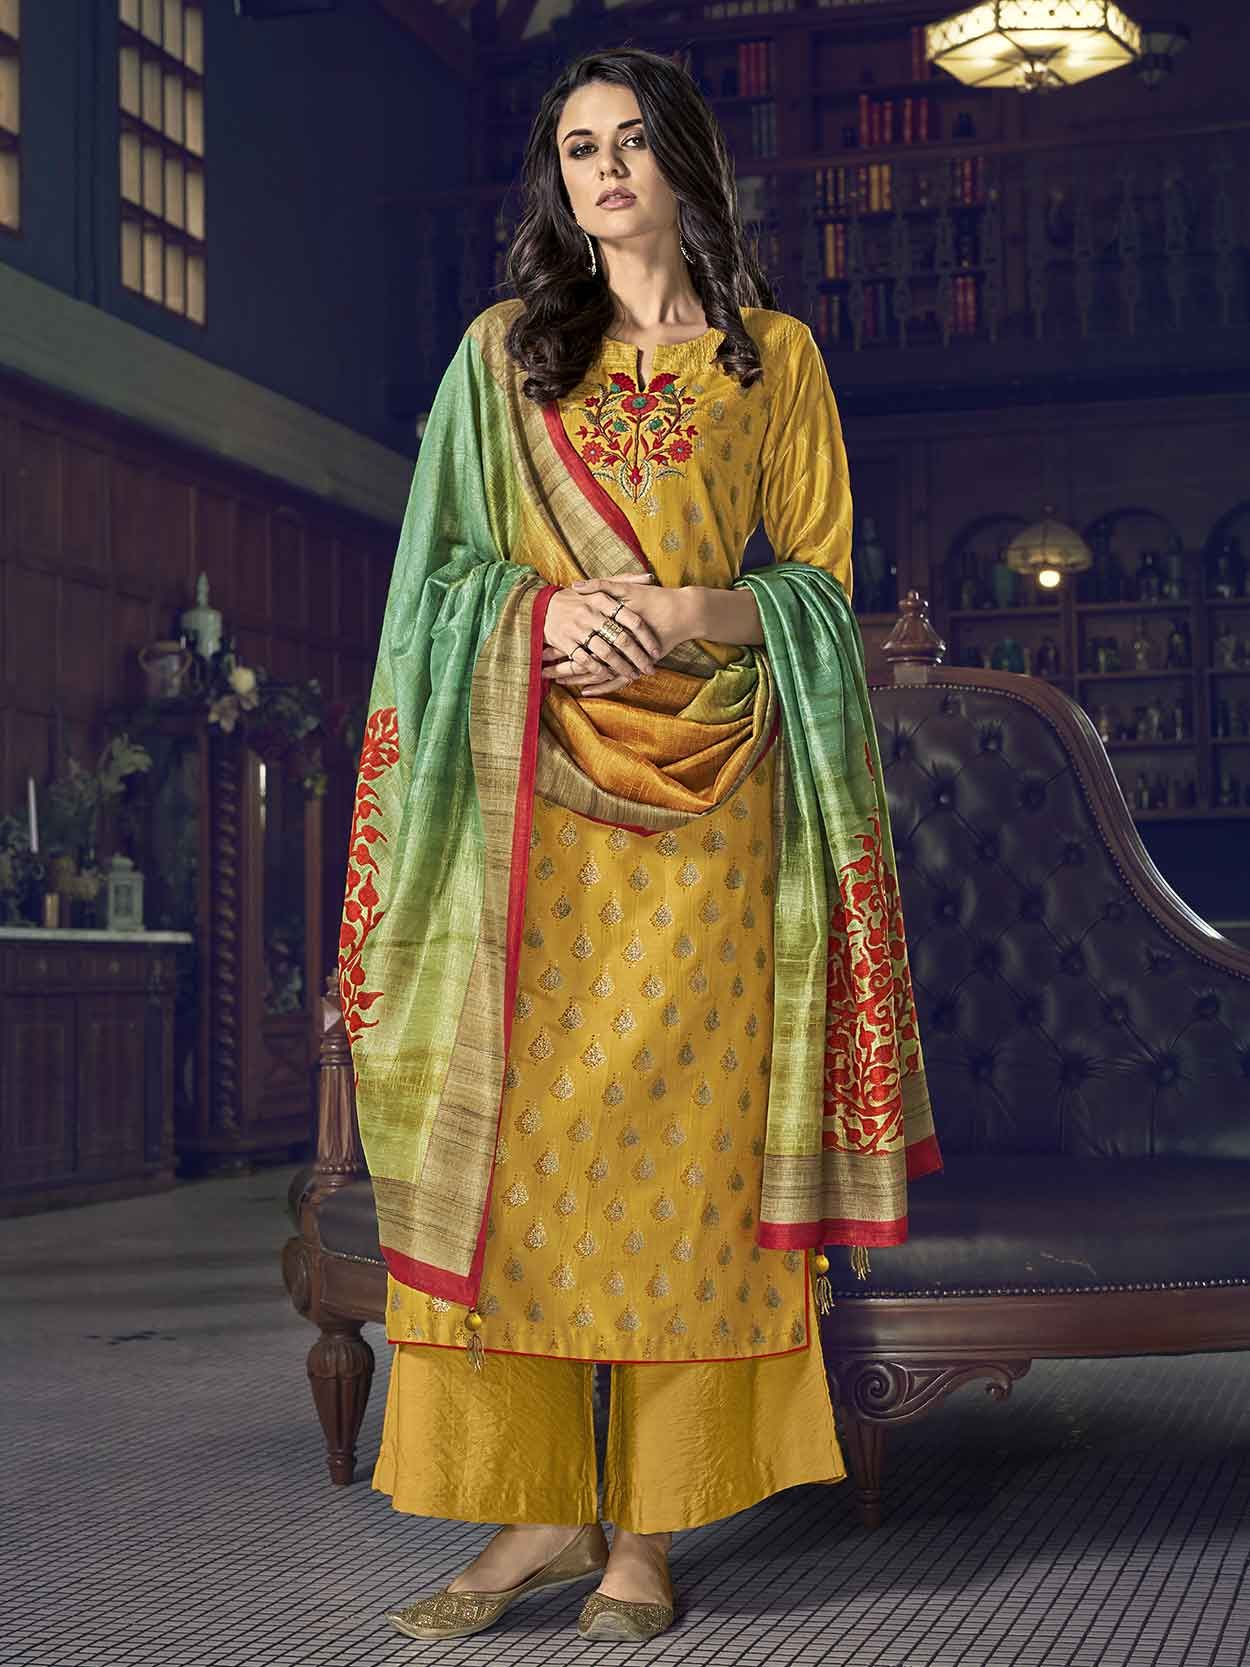 15 Stunning Designs of Yellow Salwar kameez For Any Occasion